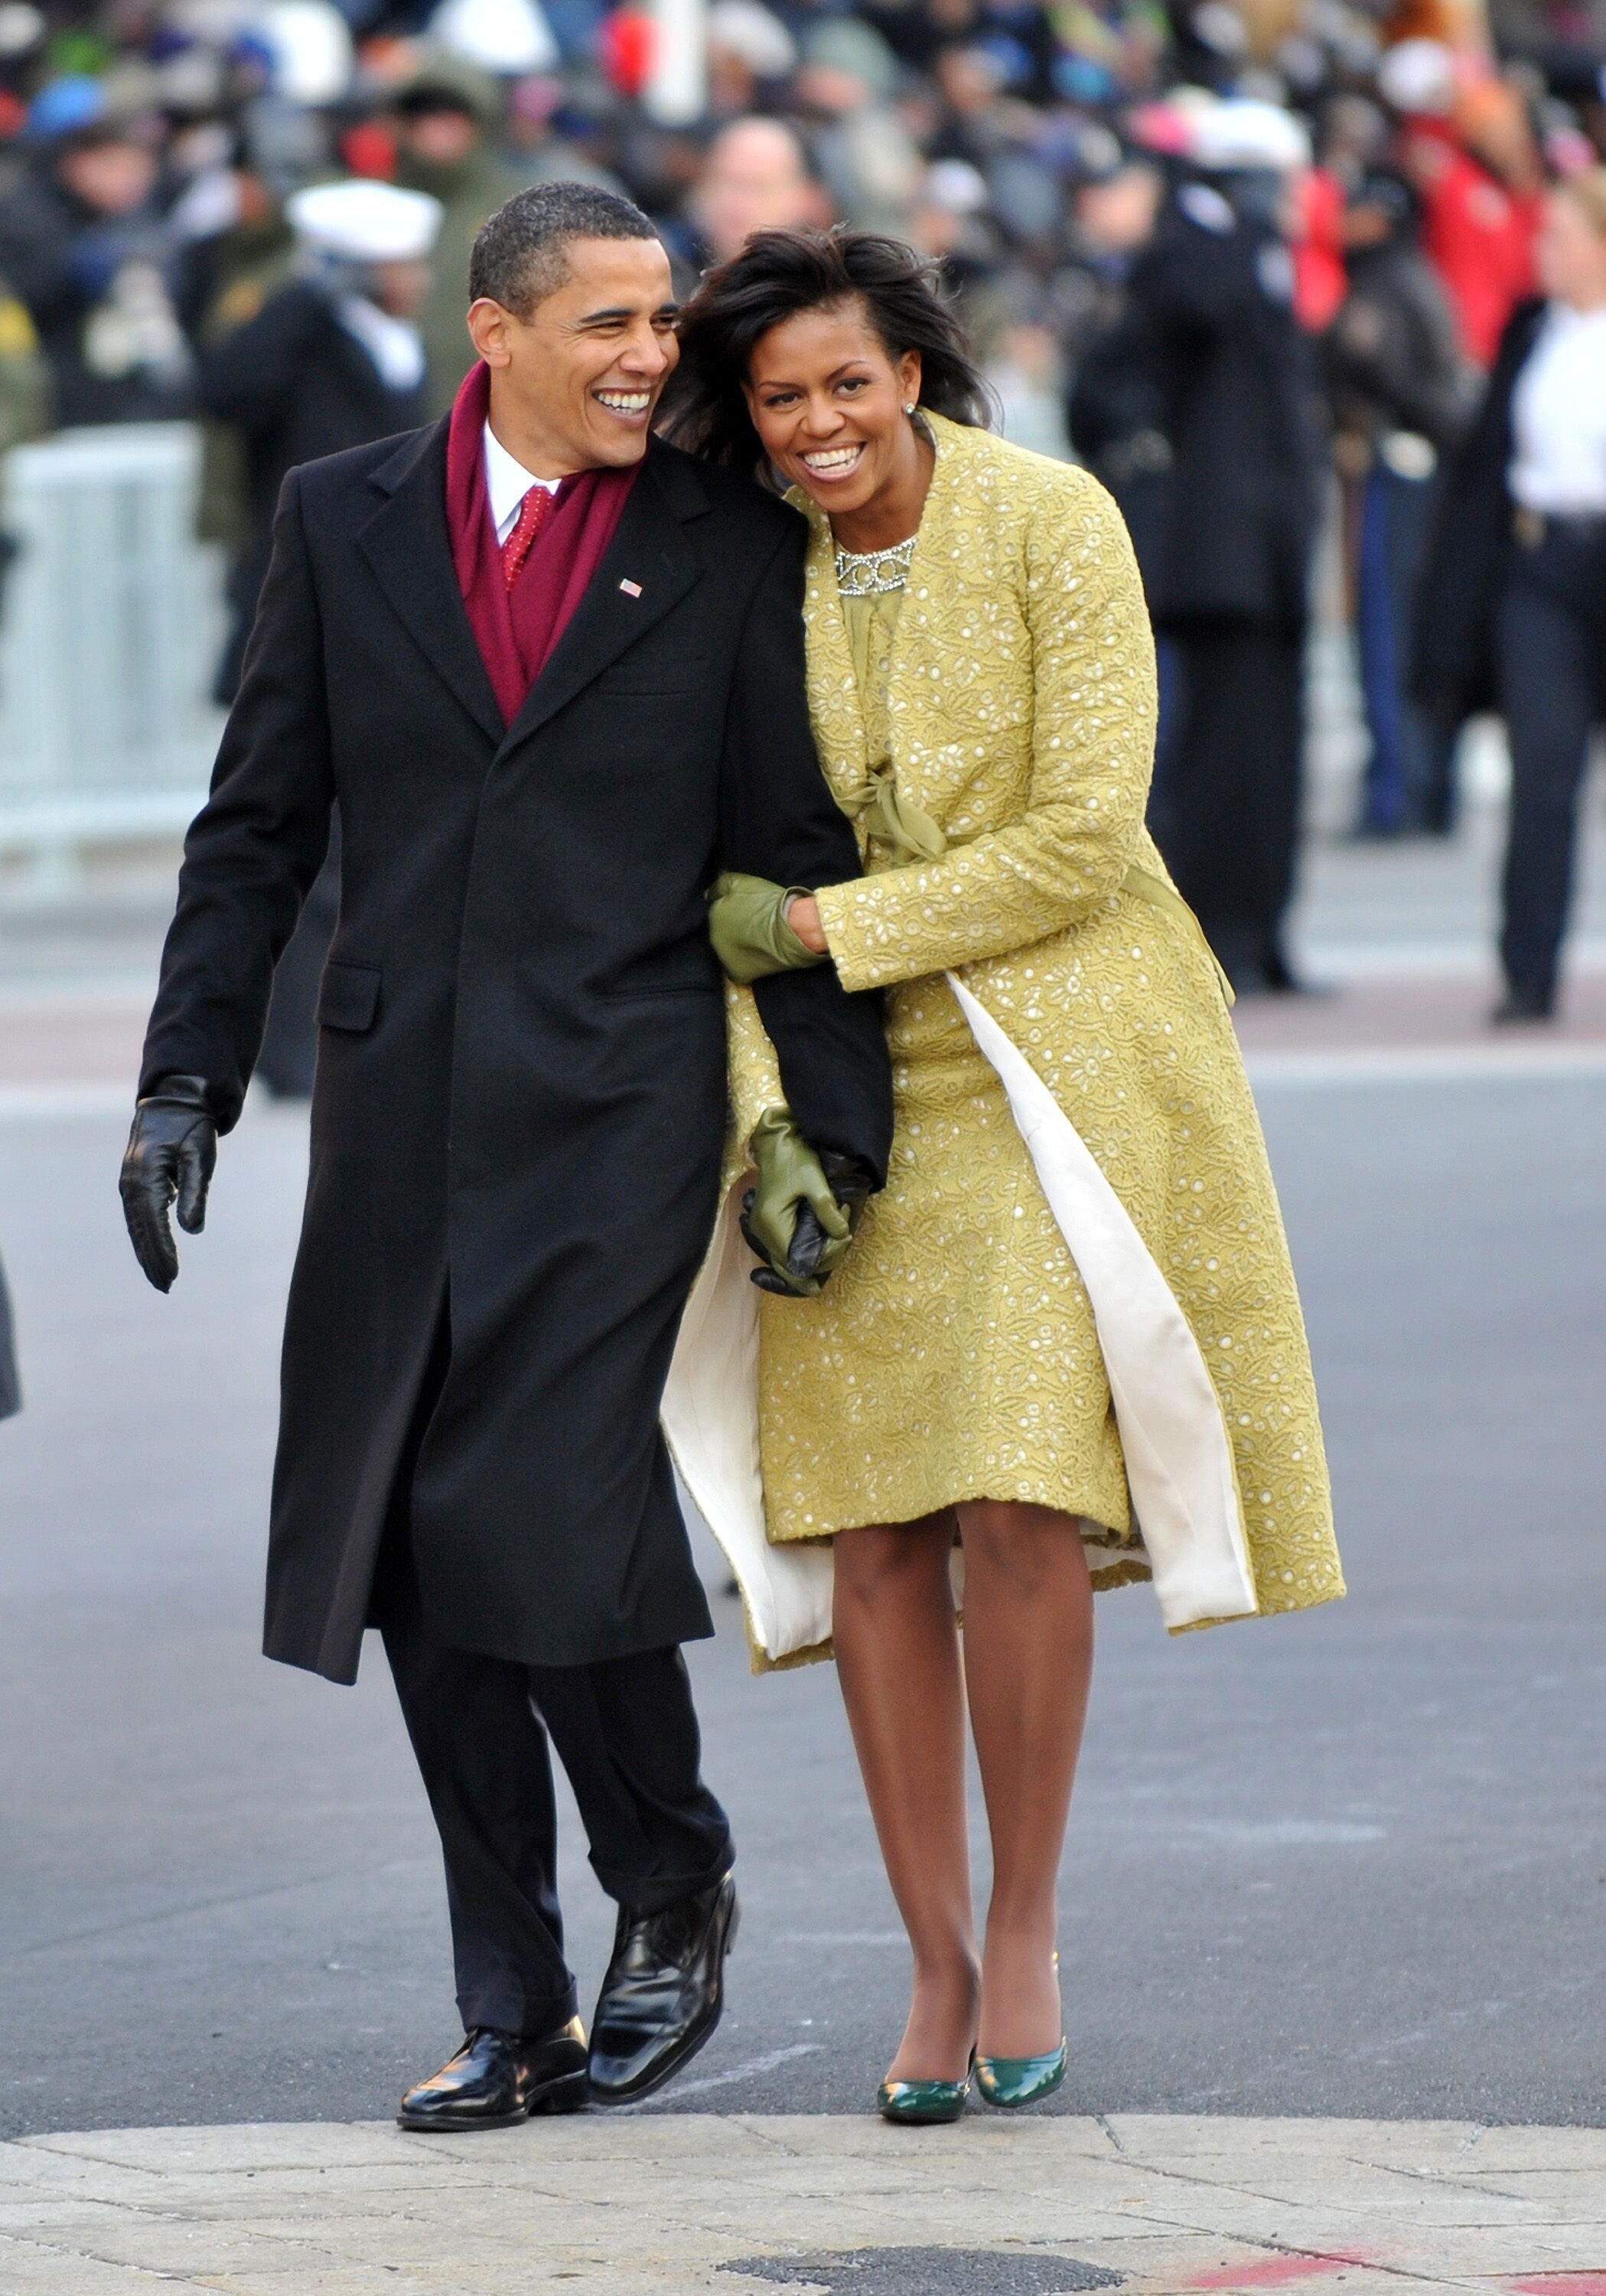 Former President Barack Obama and First lady Michelle Obama at the 2009 Inaugural Parade in Washington, DC | Photo: Ron Sachs-Pool/Getty Images